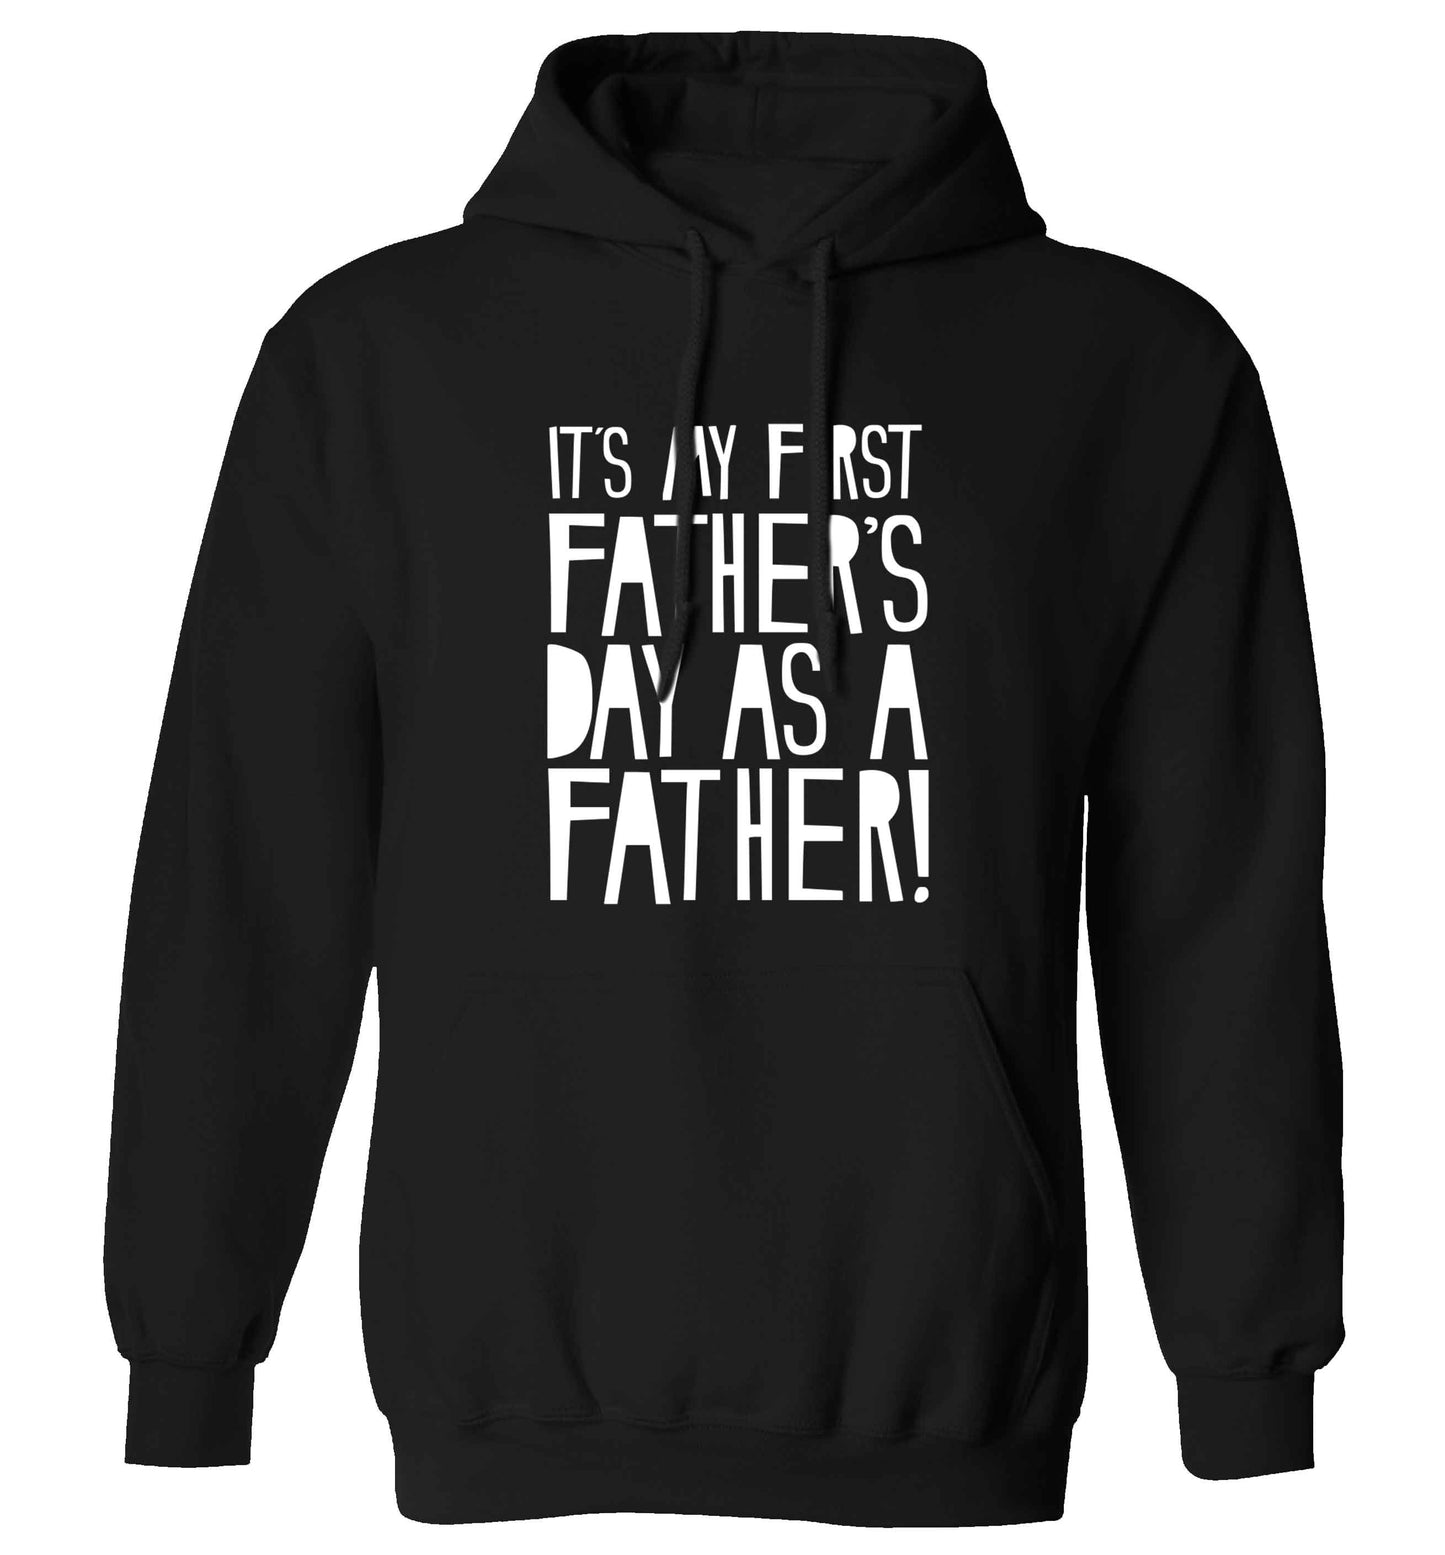 It's my first father's day as a father! adults unisex black hoodie 2XL